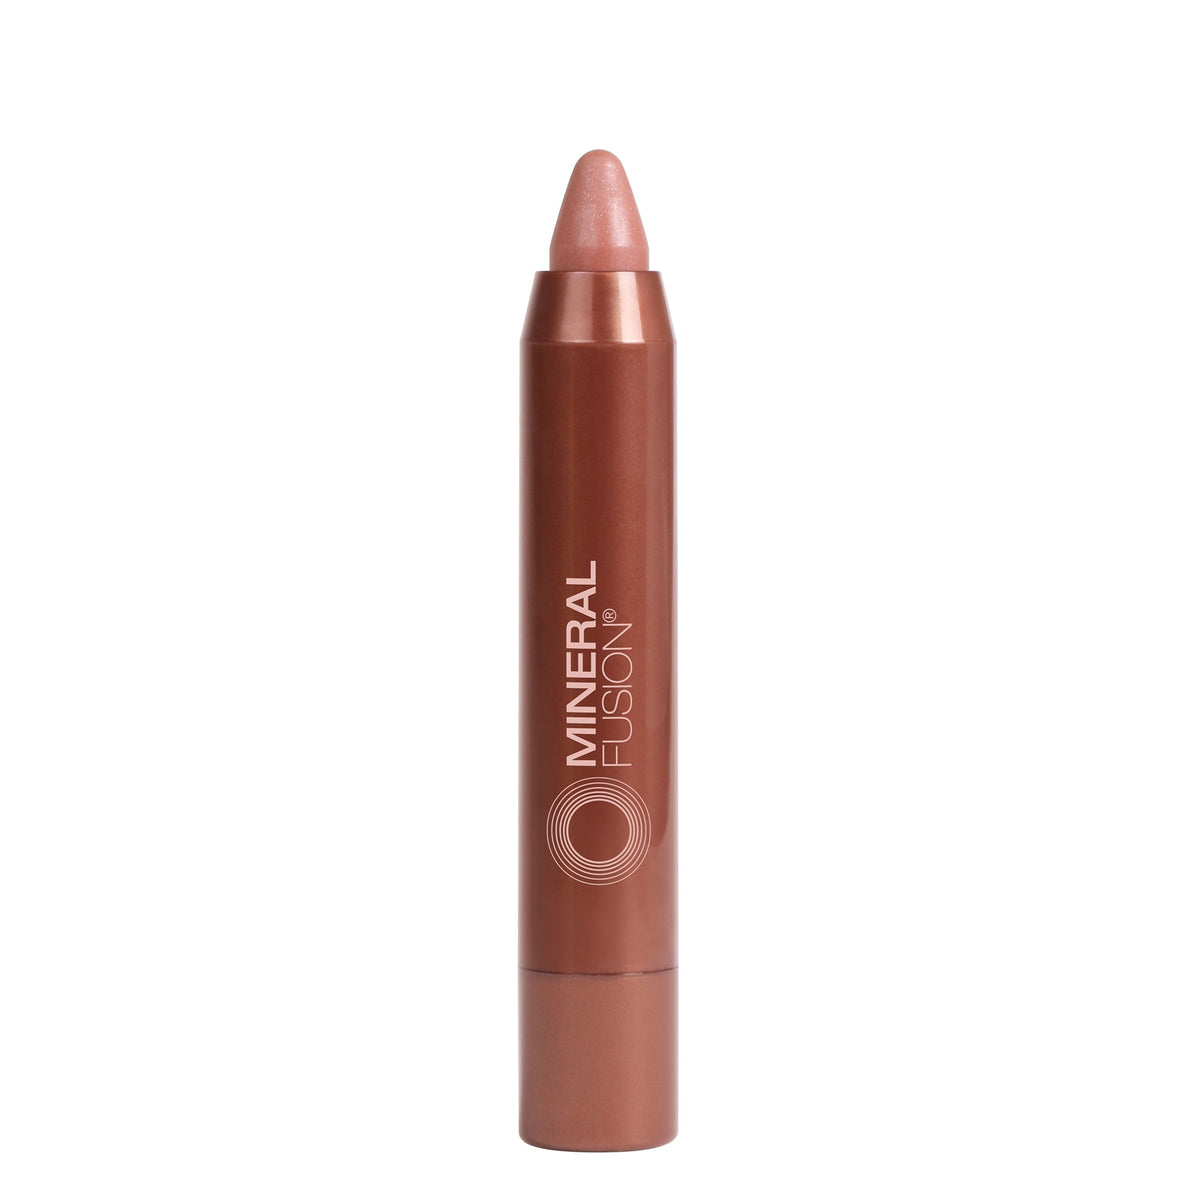 Mineral Fusion - Sheer Moisture Lip Tint - Glisten- caramel shimmer / .10 oz - by Mineral Fusion |ProCare Outlet|